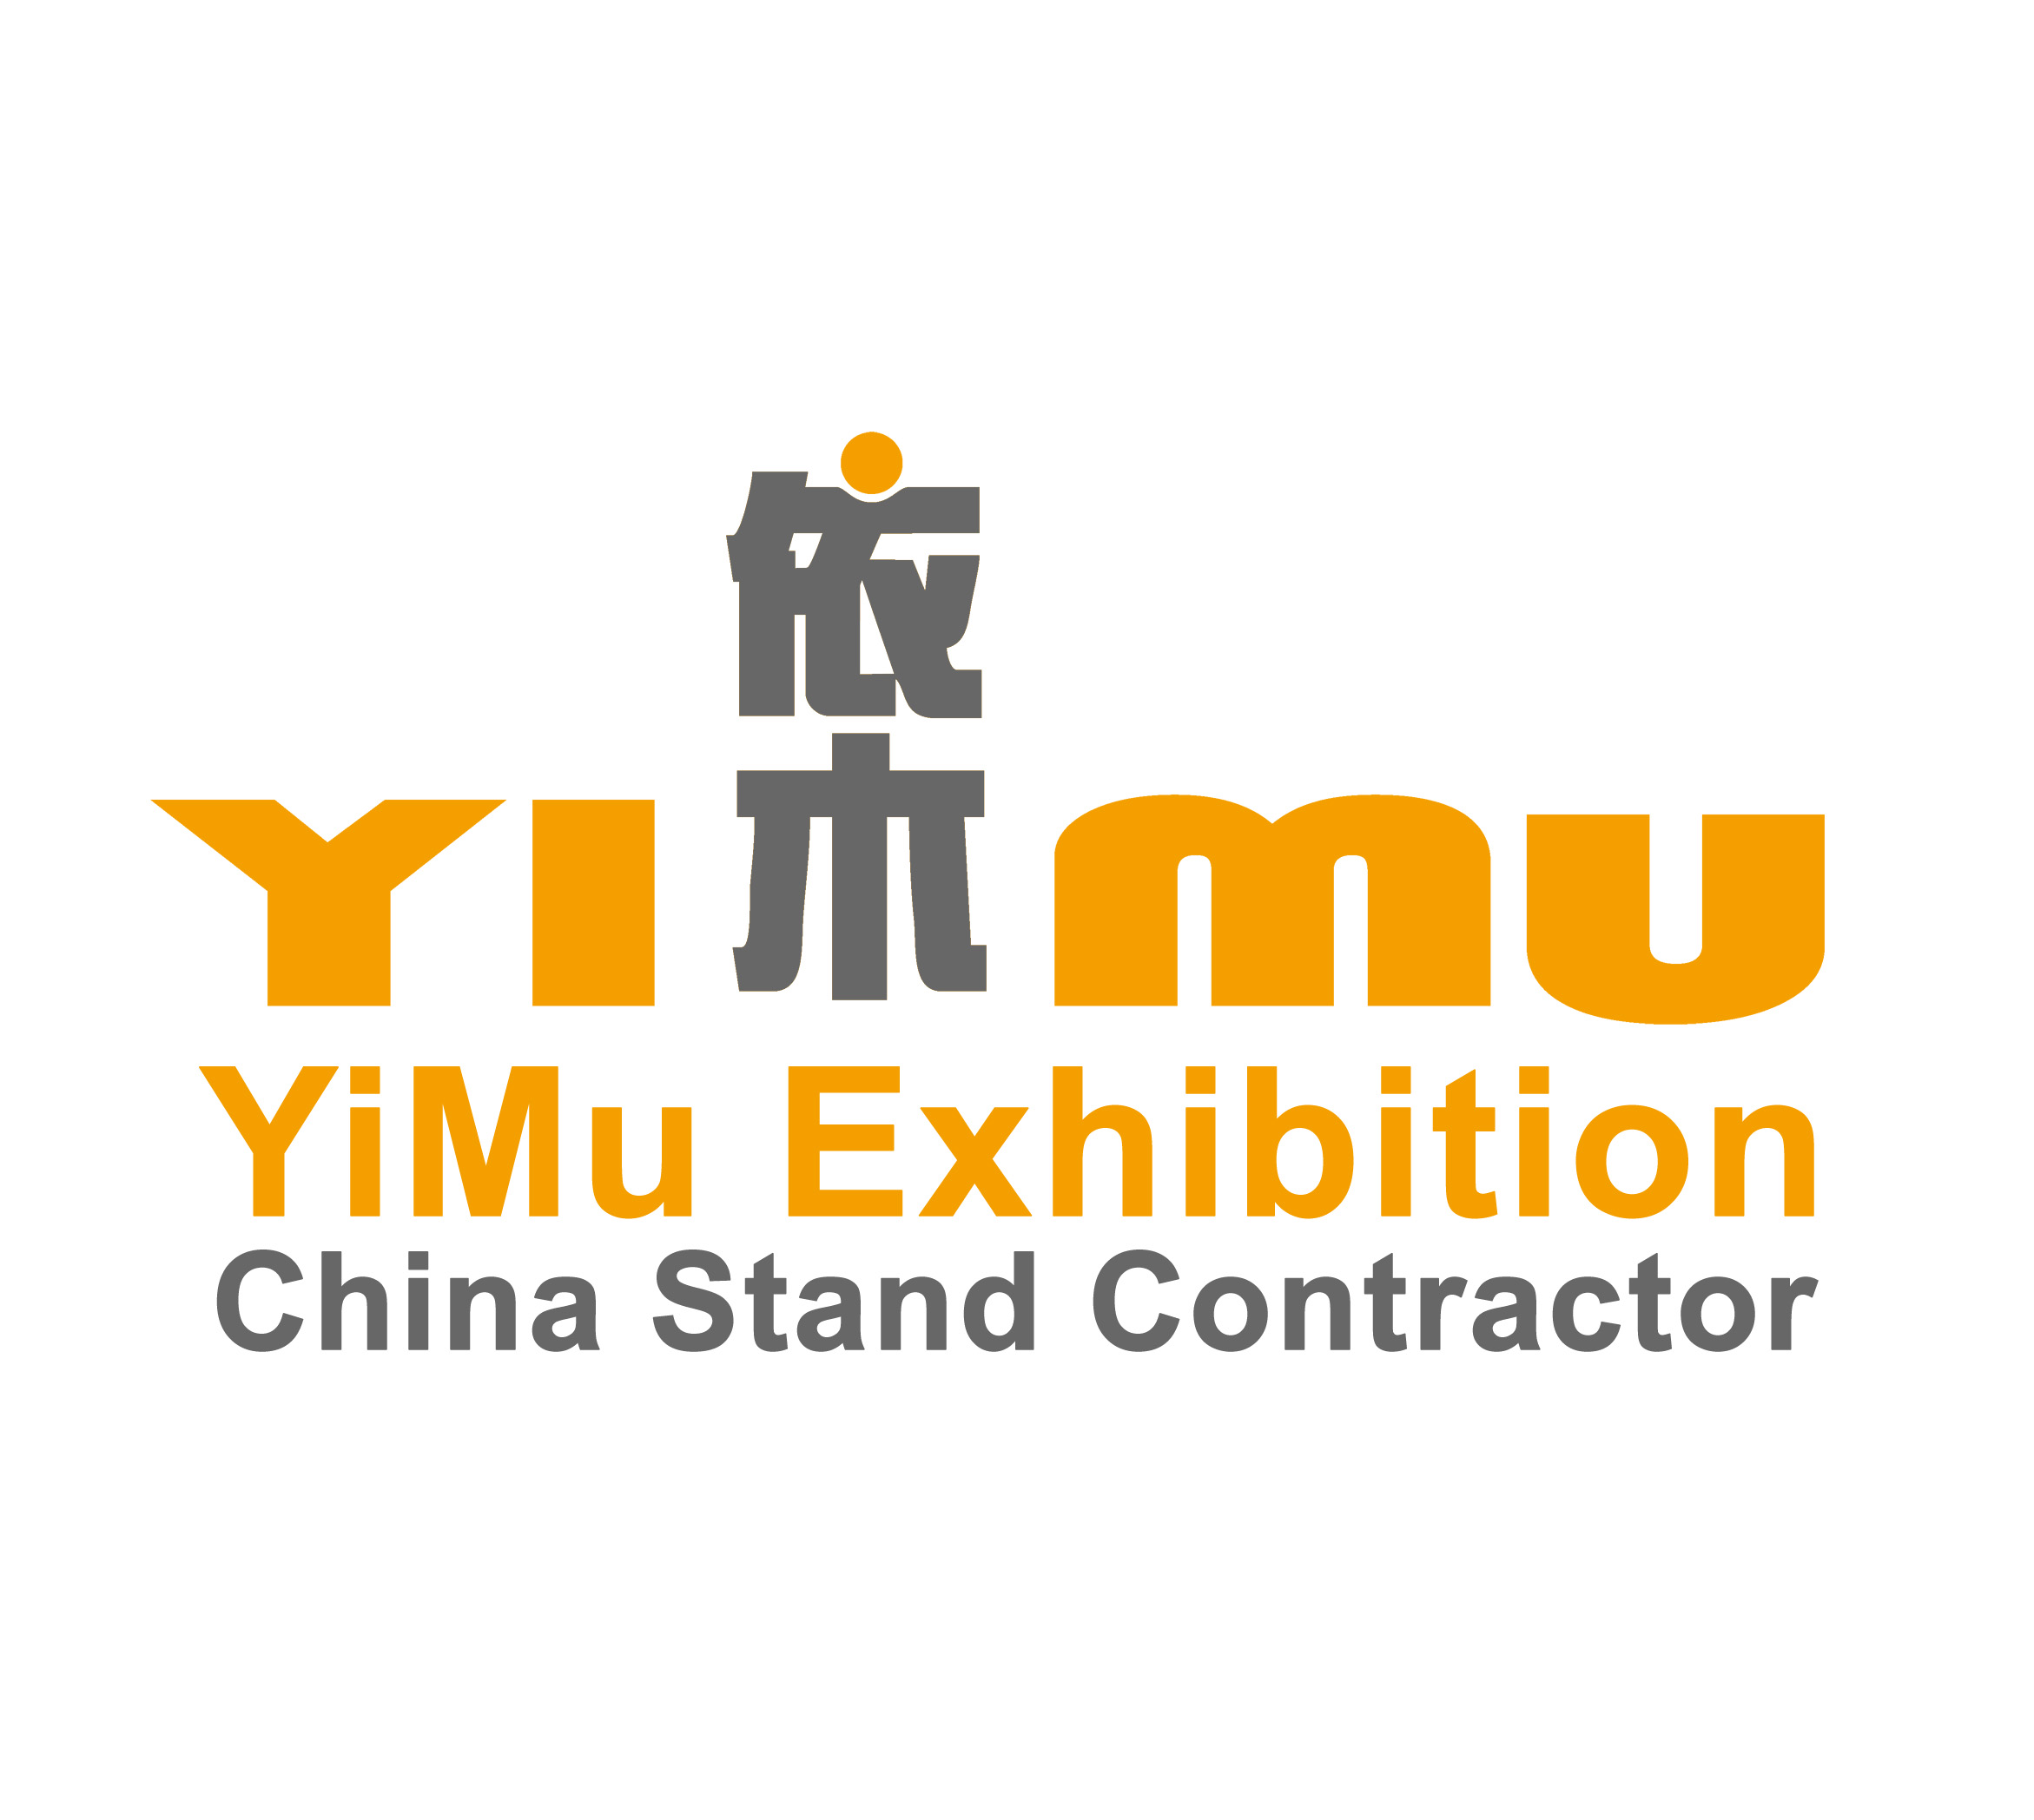 China Stand Contractor | Booth Design | Exhibition Stand Fabrication | Custom Booth construction  |  Conference&Event Management  | Hongkong exhibition contractor | stand designs | event booth fabrication | exhibition display stands | Country Pavilion Construction in hongkong show | One-stop on site services.